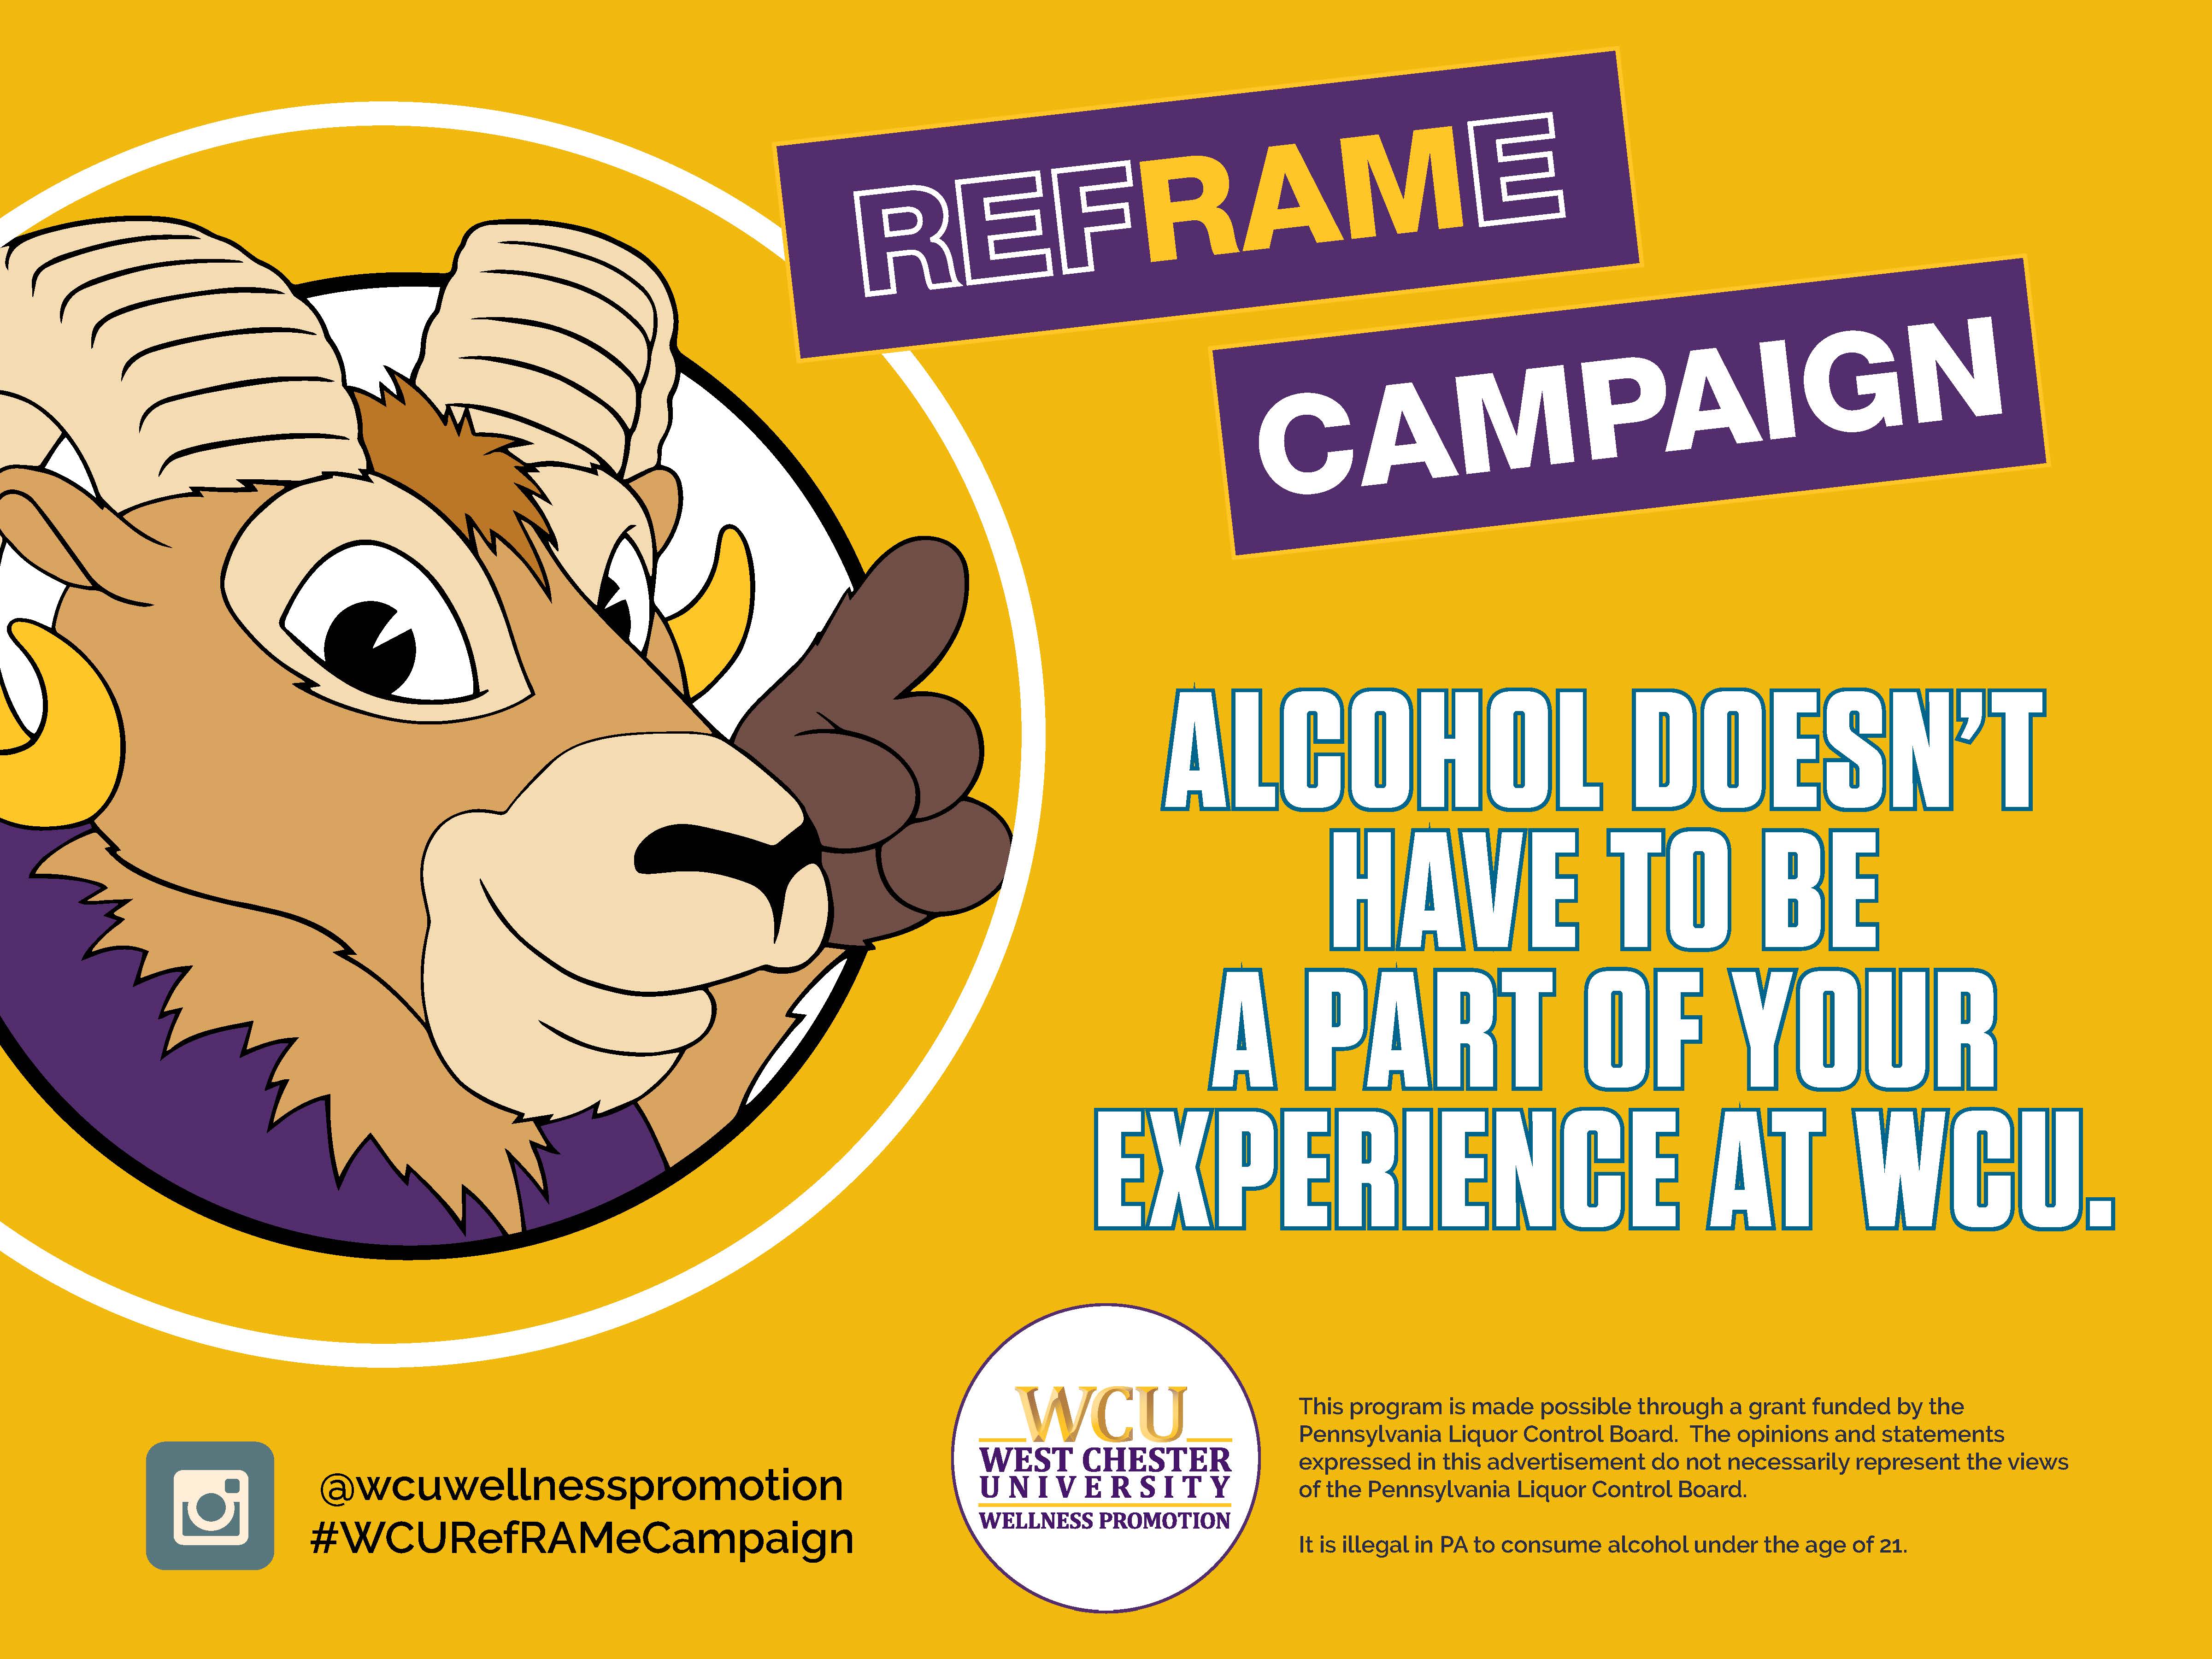 Alcohol doesn't have to be a part of your experience at WCU.